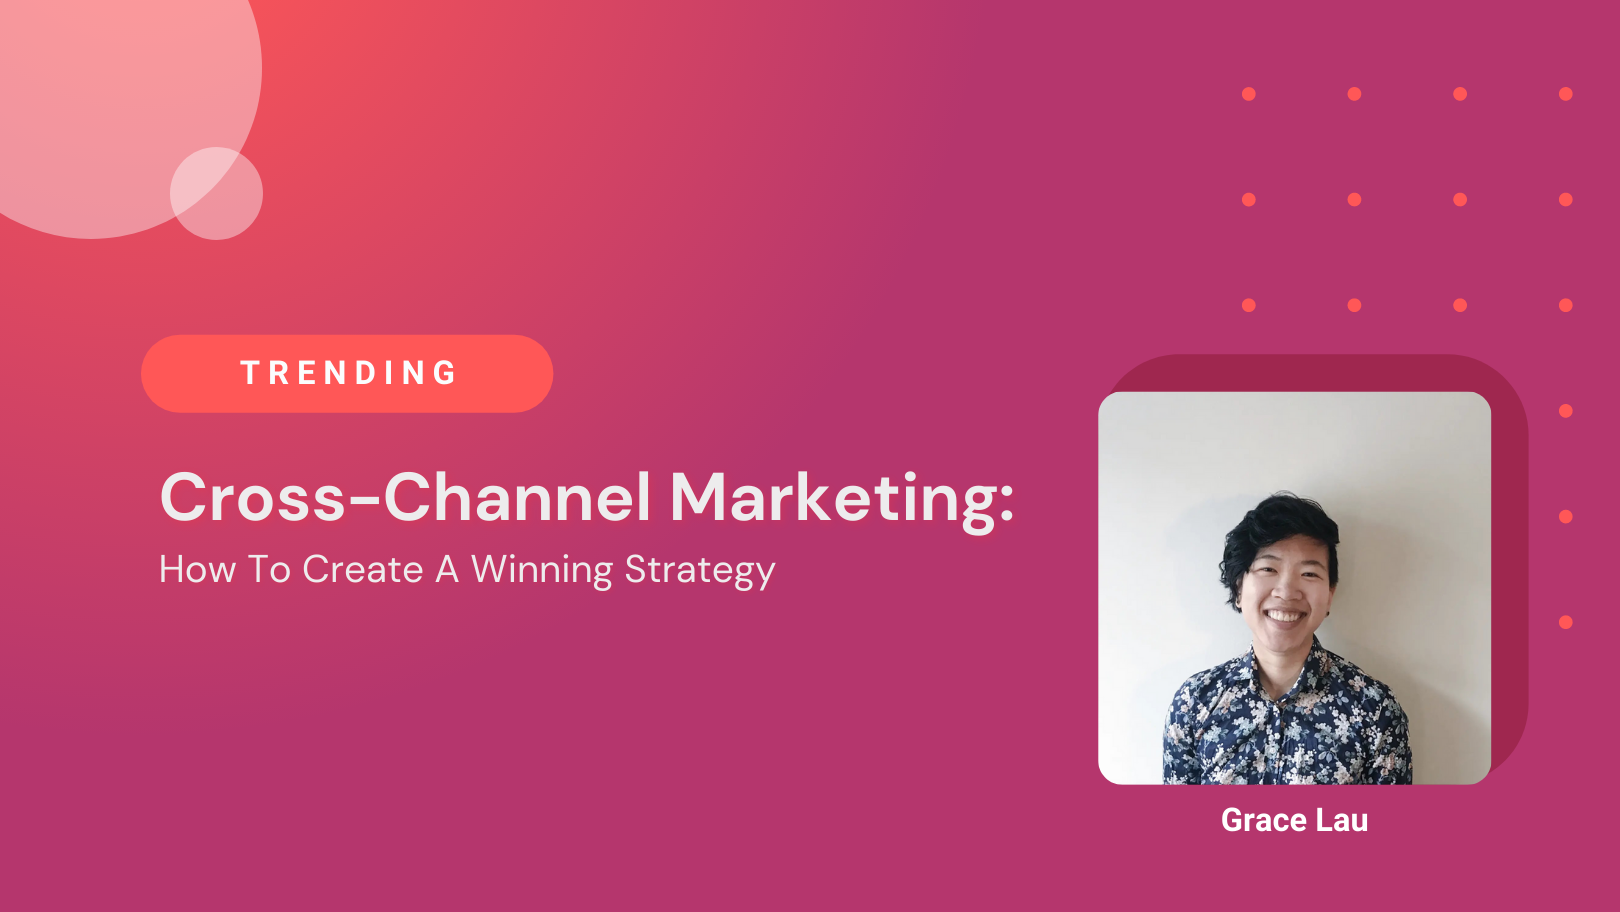 How To Create A Winning Cross-Channel Marketing Strategy